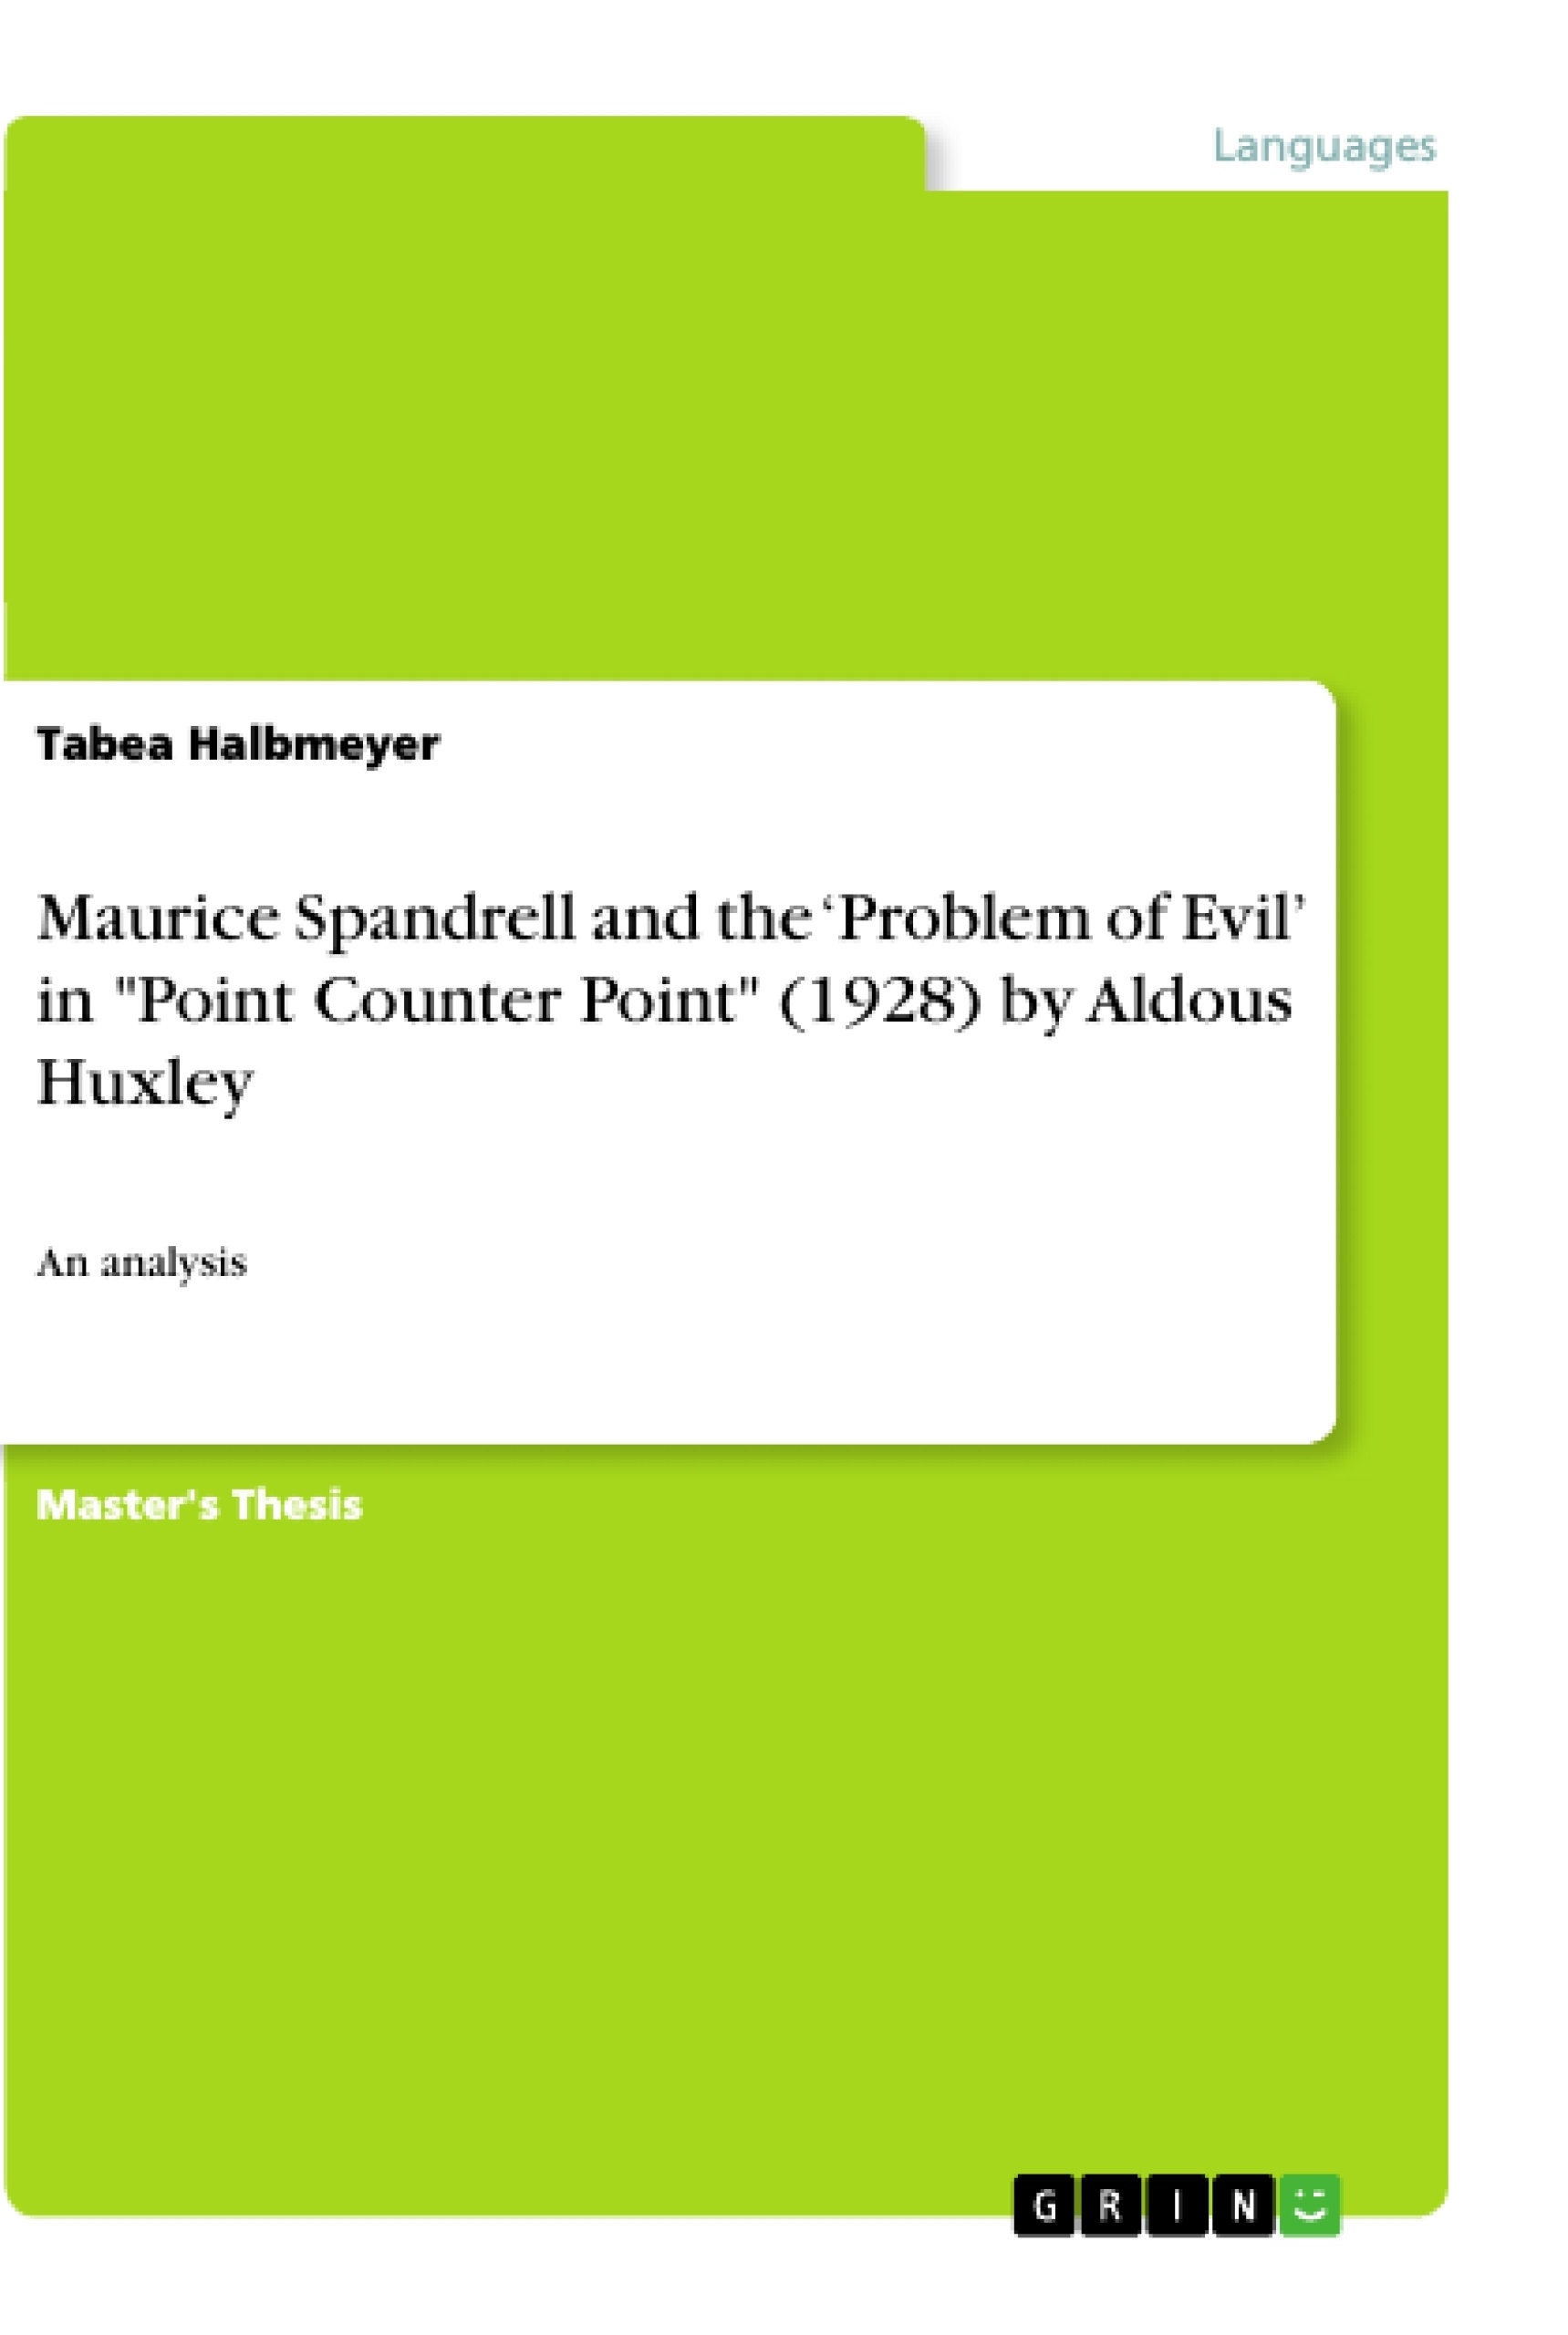 Titre: Maurice Spandrell and the ‘Problem of Evil’ in "Point Counter Point" (1928) by Aldous Huxley